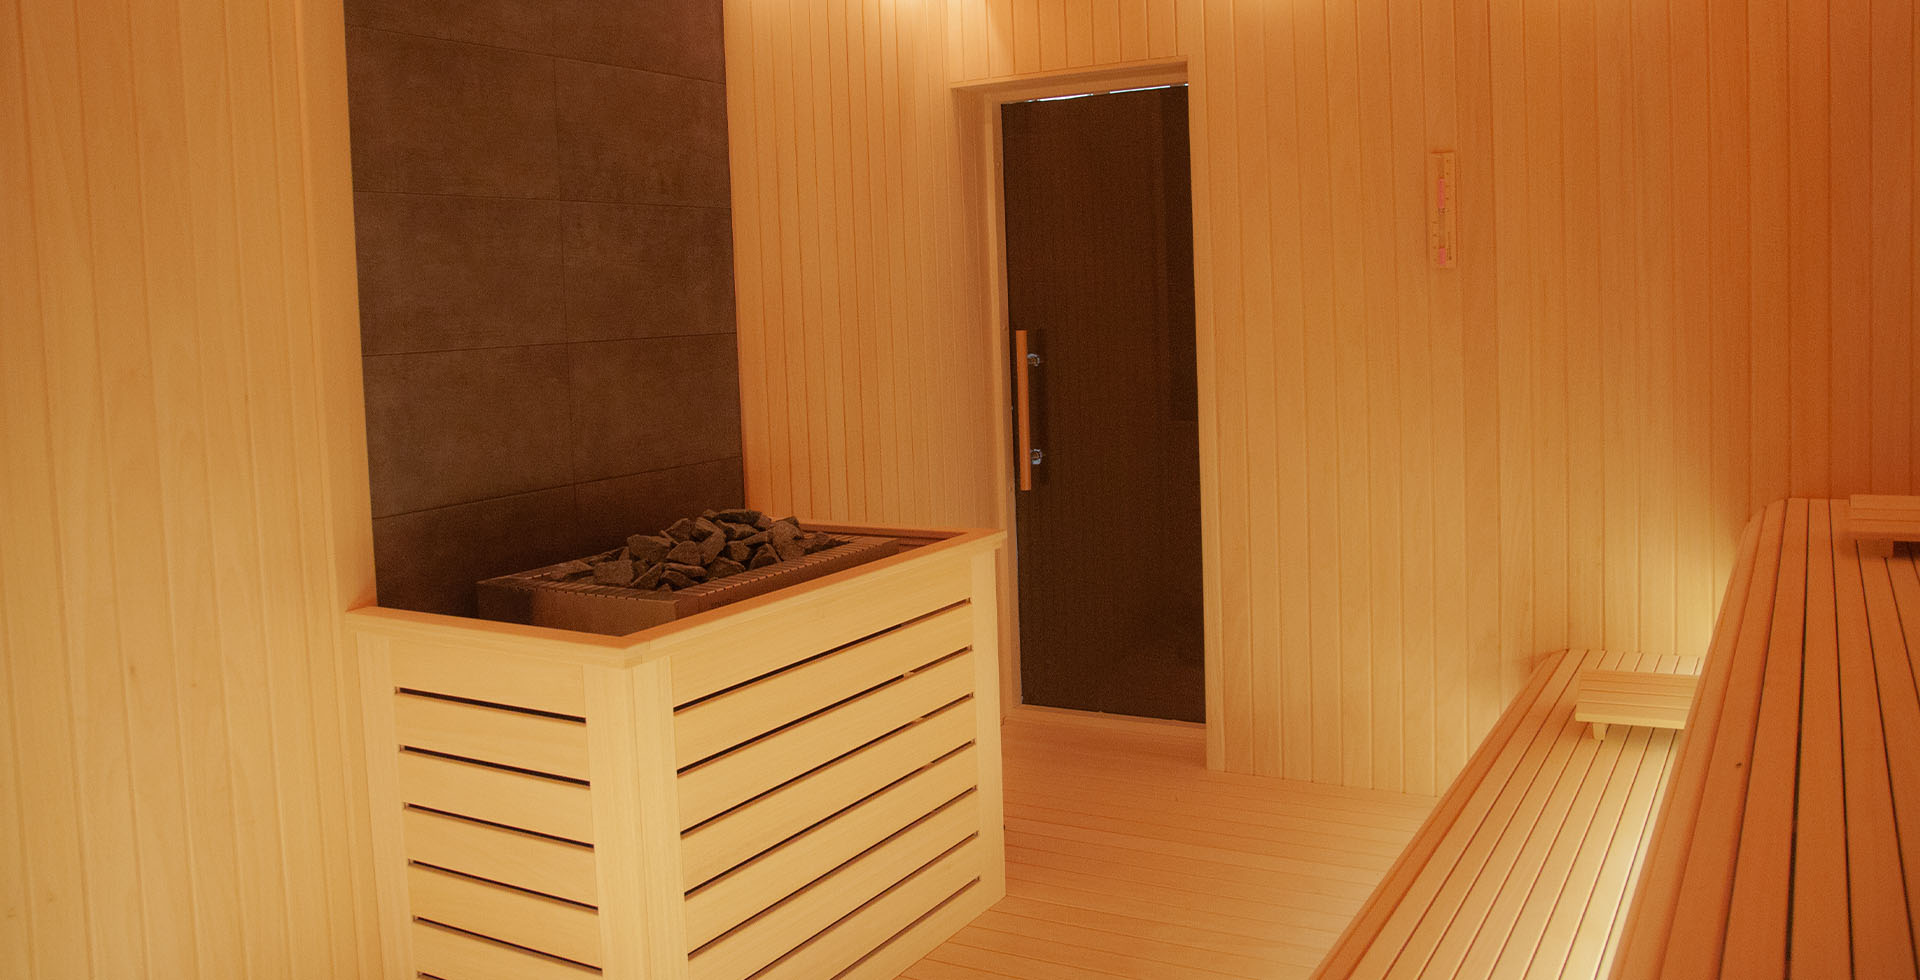 Immerse yourself in luxury – discover our Geneva sauna available for purchase. Unparalleled design meets affordability.